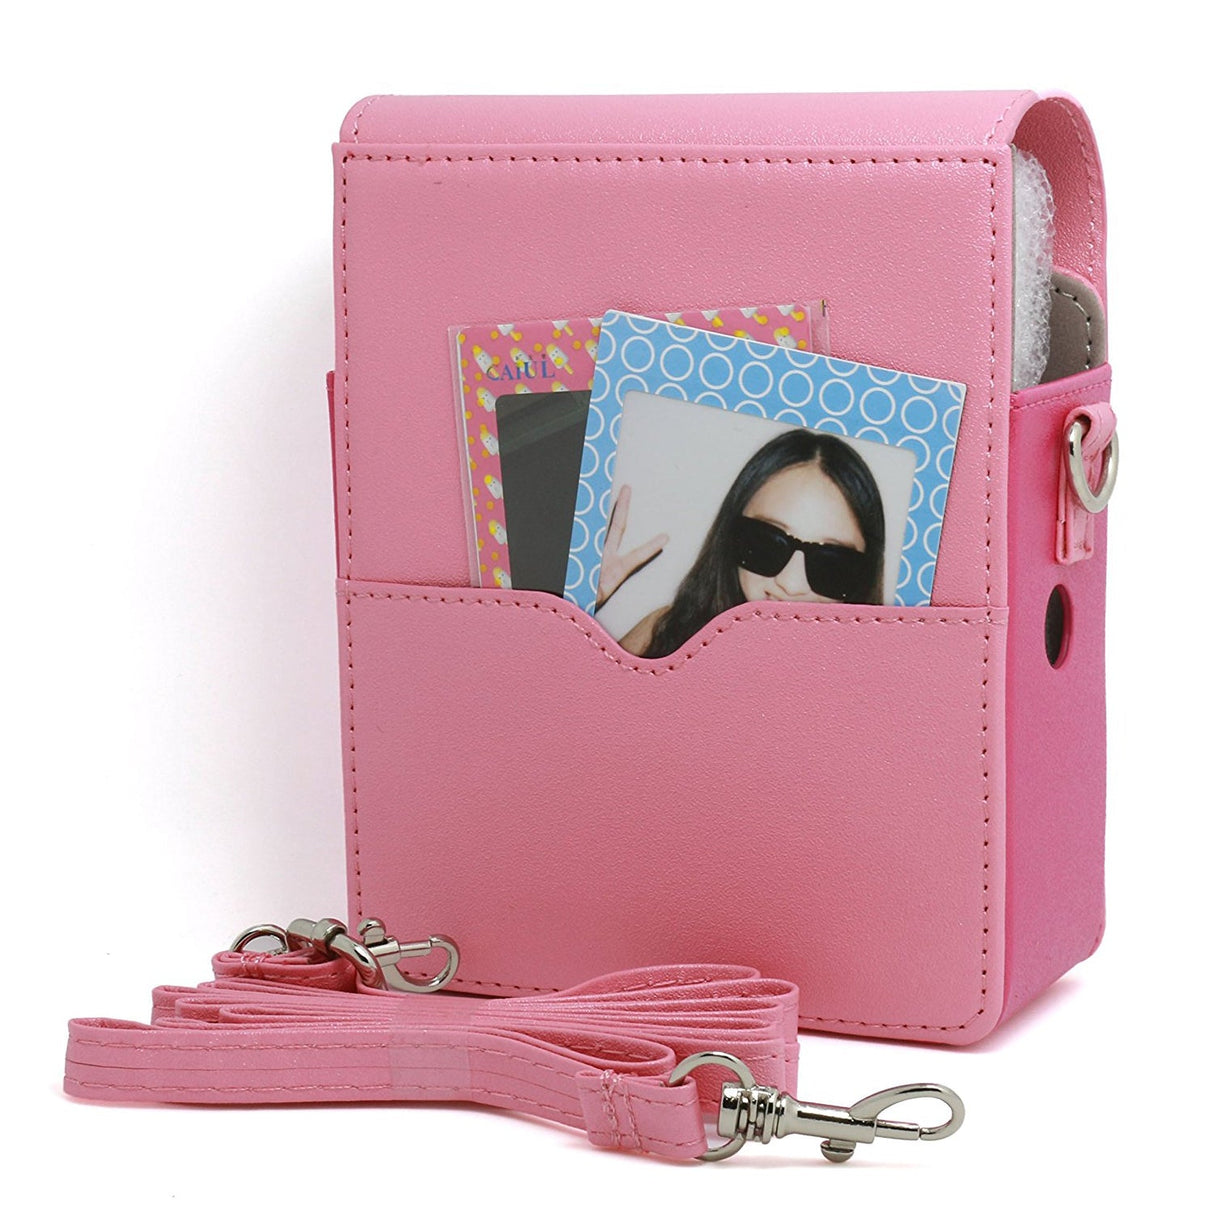 CAIUL PU Leather Case for Fujifilm Instax Share Smartphone Printer Sp1, Pink